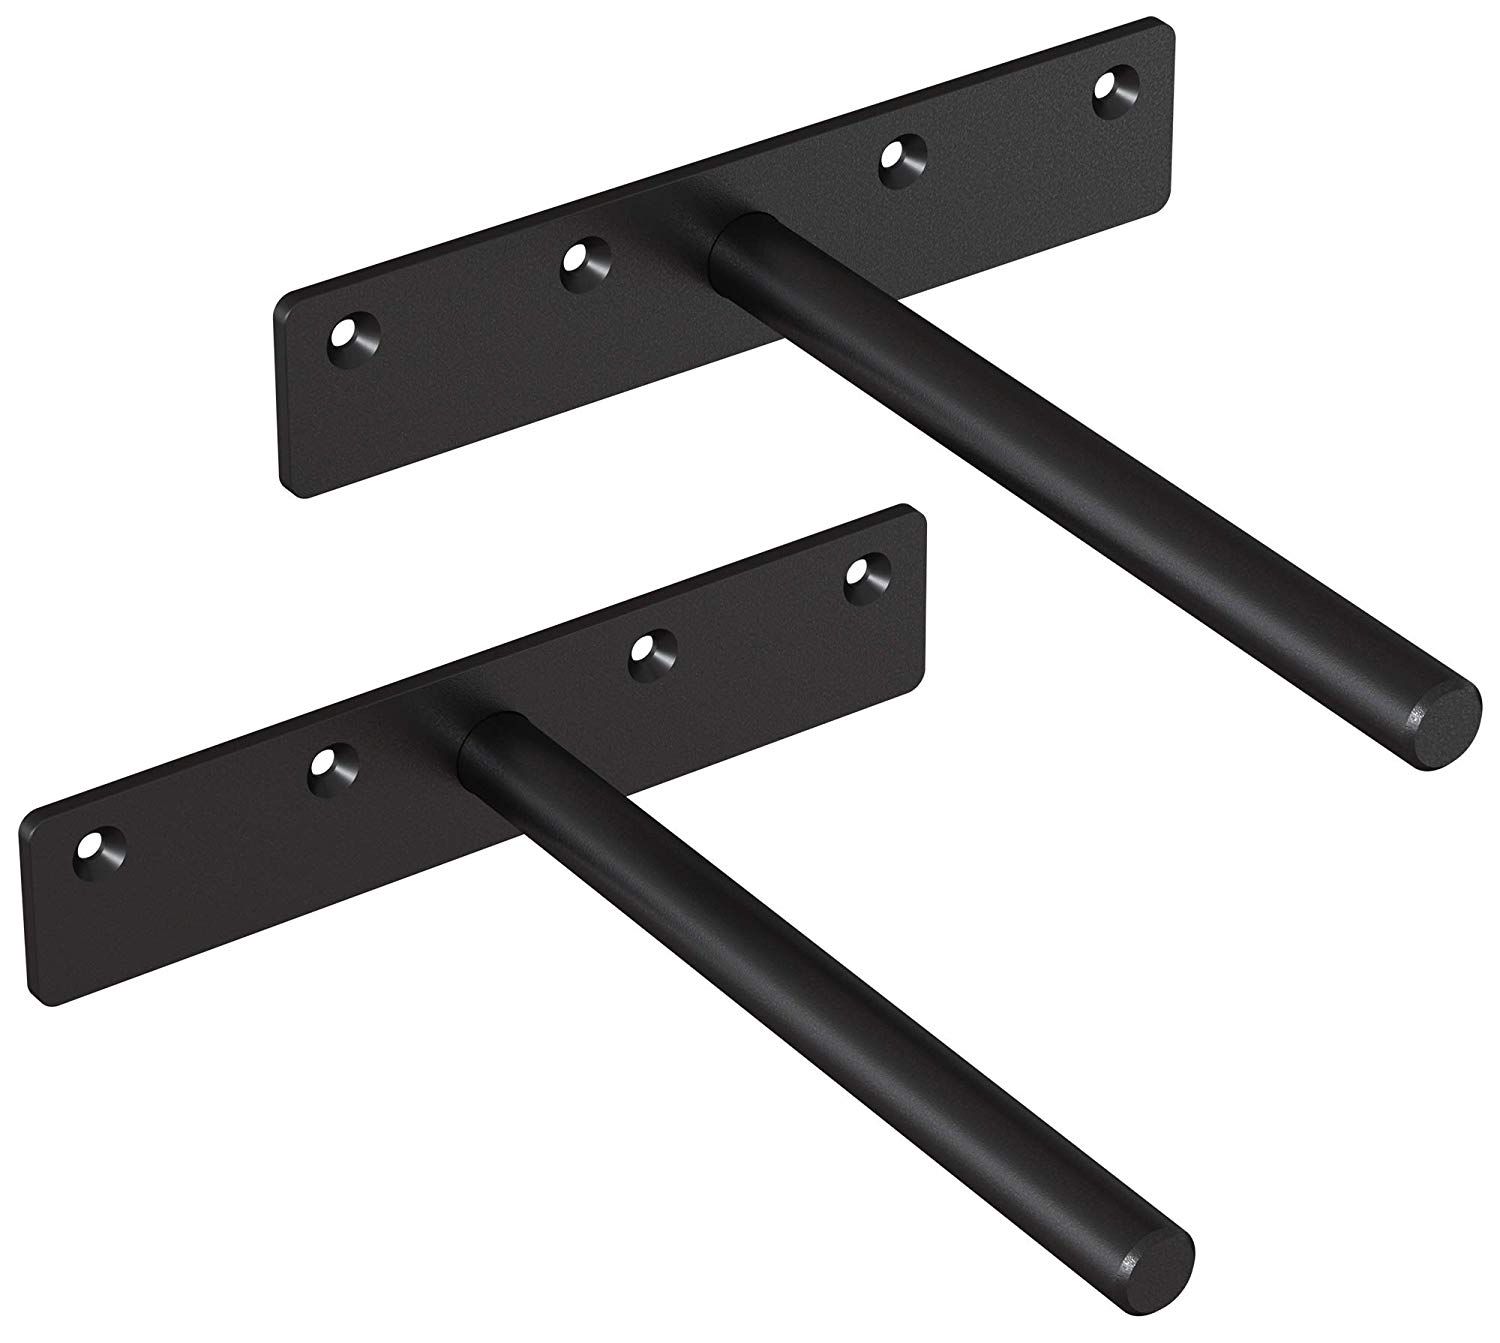 tibres floating shelf brackets heavy duty invisible blind hidden for wooden rustproof supports solid steel concealed set pottery barn canopy glass shelves with wood wall mounted